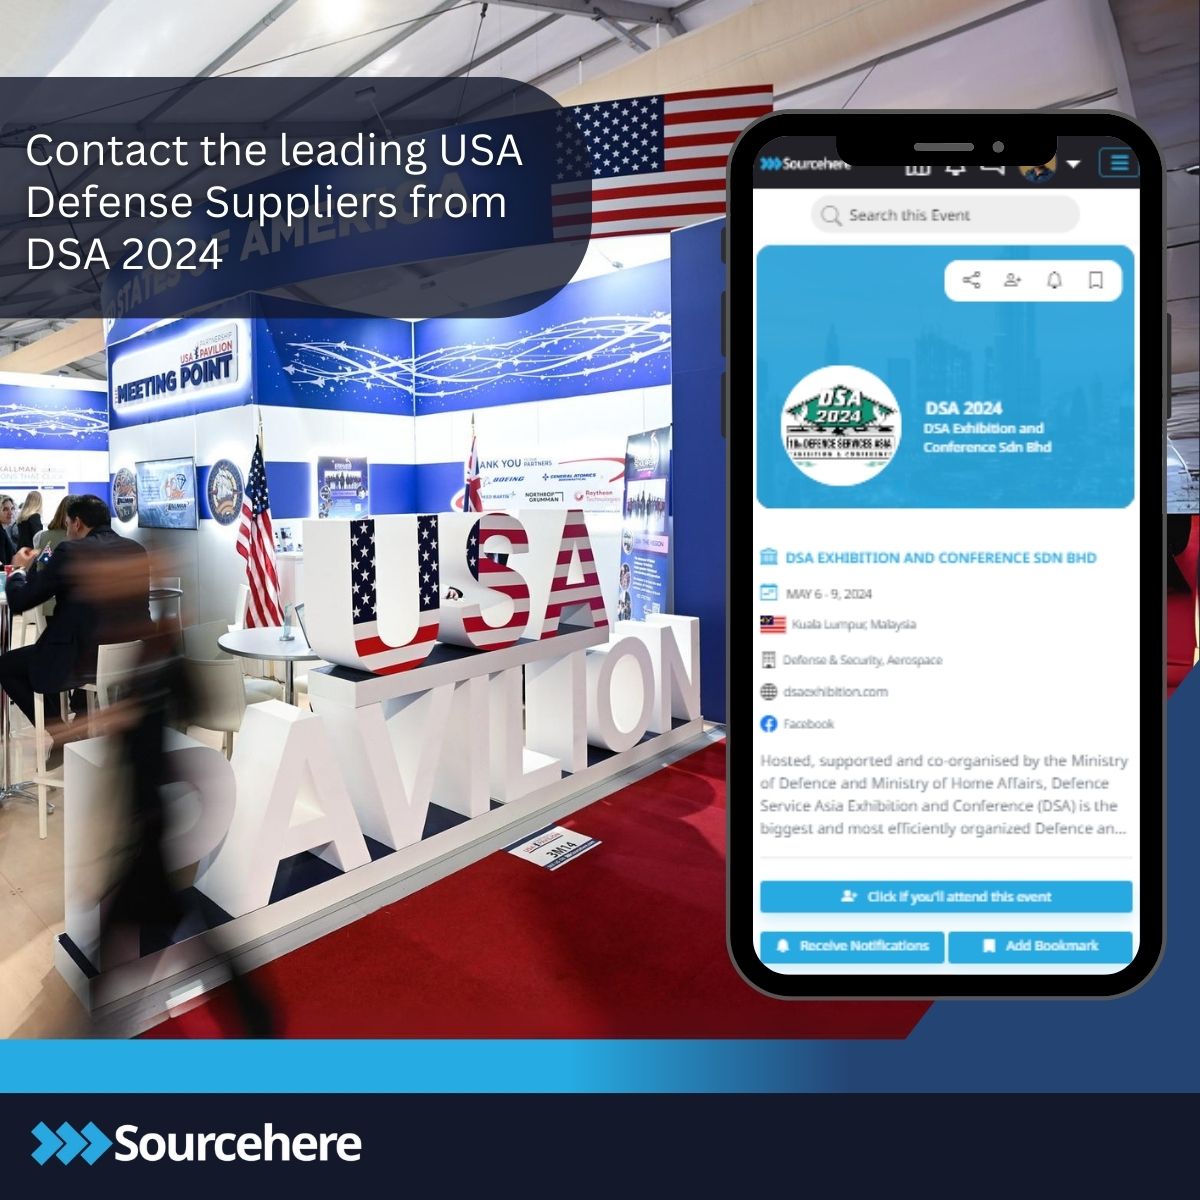 🌟@DSAMalaysia is next week and our partner @Kallman is organizing the #USAPartnershipPavilion, with the top #defense & #security suppliers. If you can't attend, register via @Sourcehere to connect directly with exhibitors. Register now to use our built-in #messaging feature.